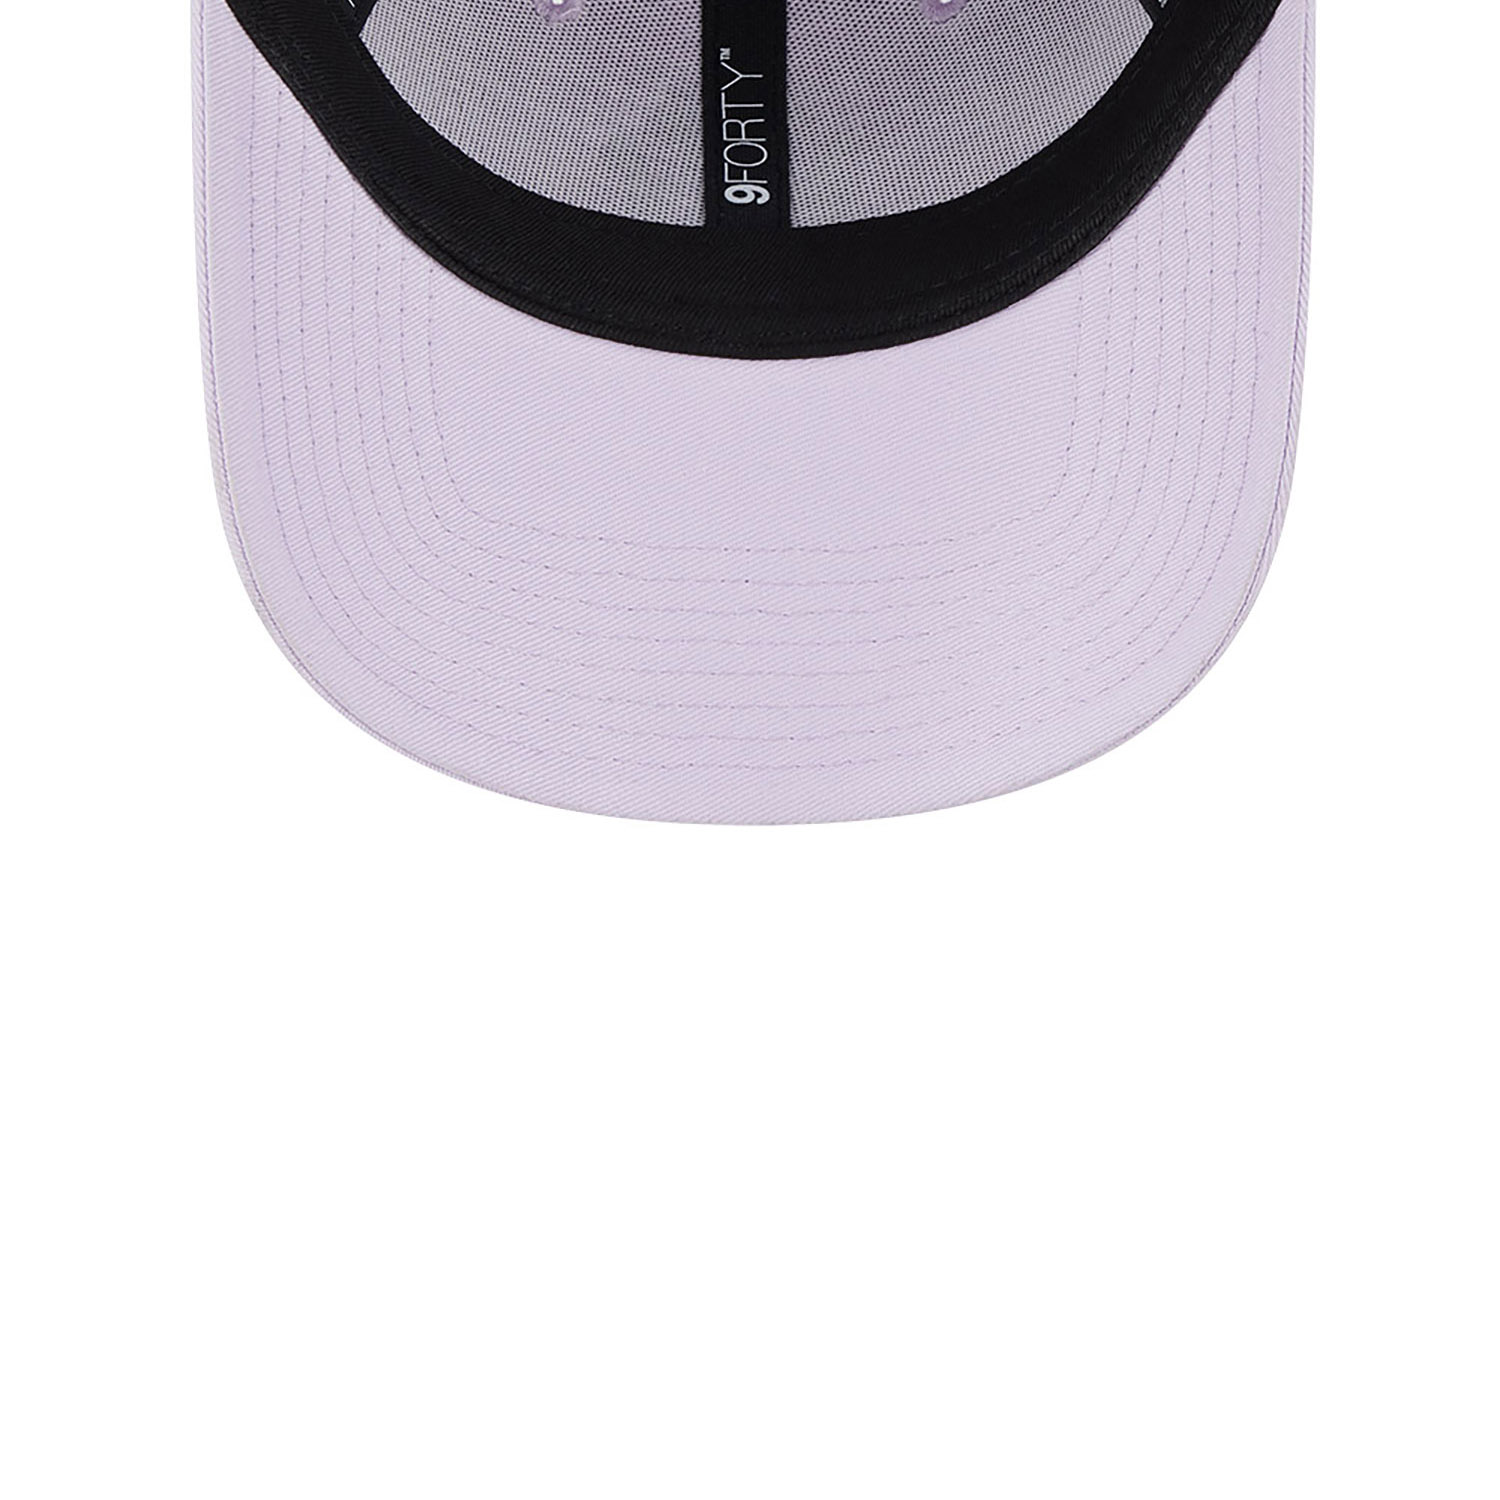 New York Yankees Womens League Essential Lilac 9FORTY Adjustable Cap